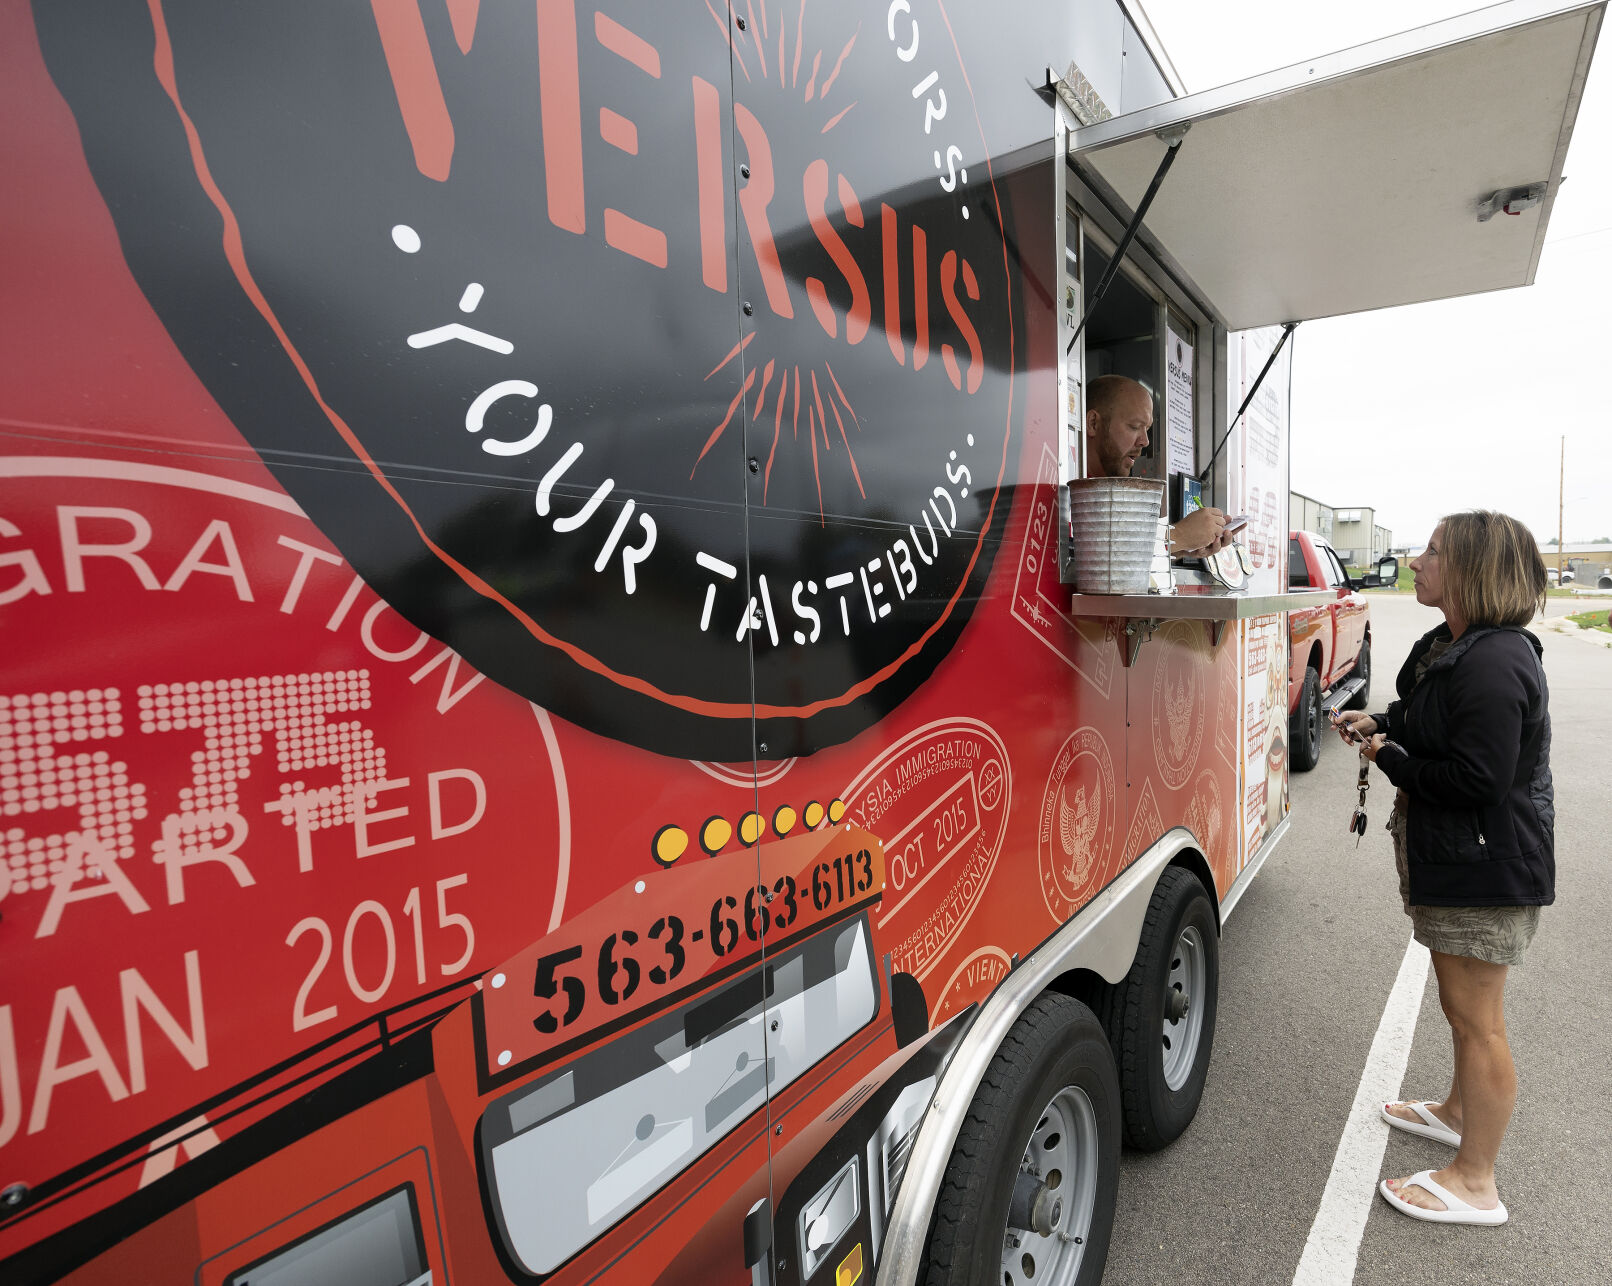 Versus food truk co-owner Lucas Miller takes an order from Denise Simms while it is parked at a lot in Peosta, Iowa on Friday, Sept. 22, 2023.    PHOTO CREDIT: File photo